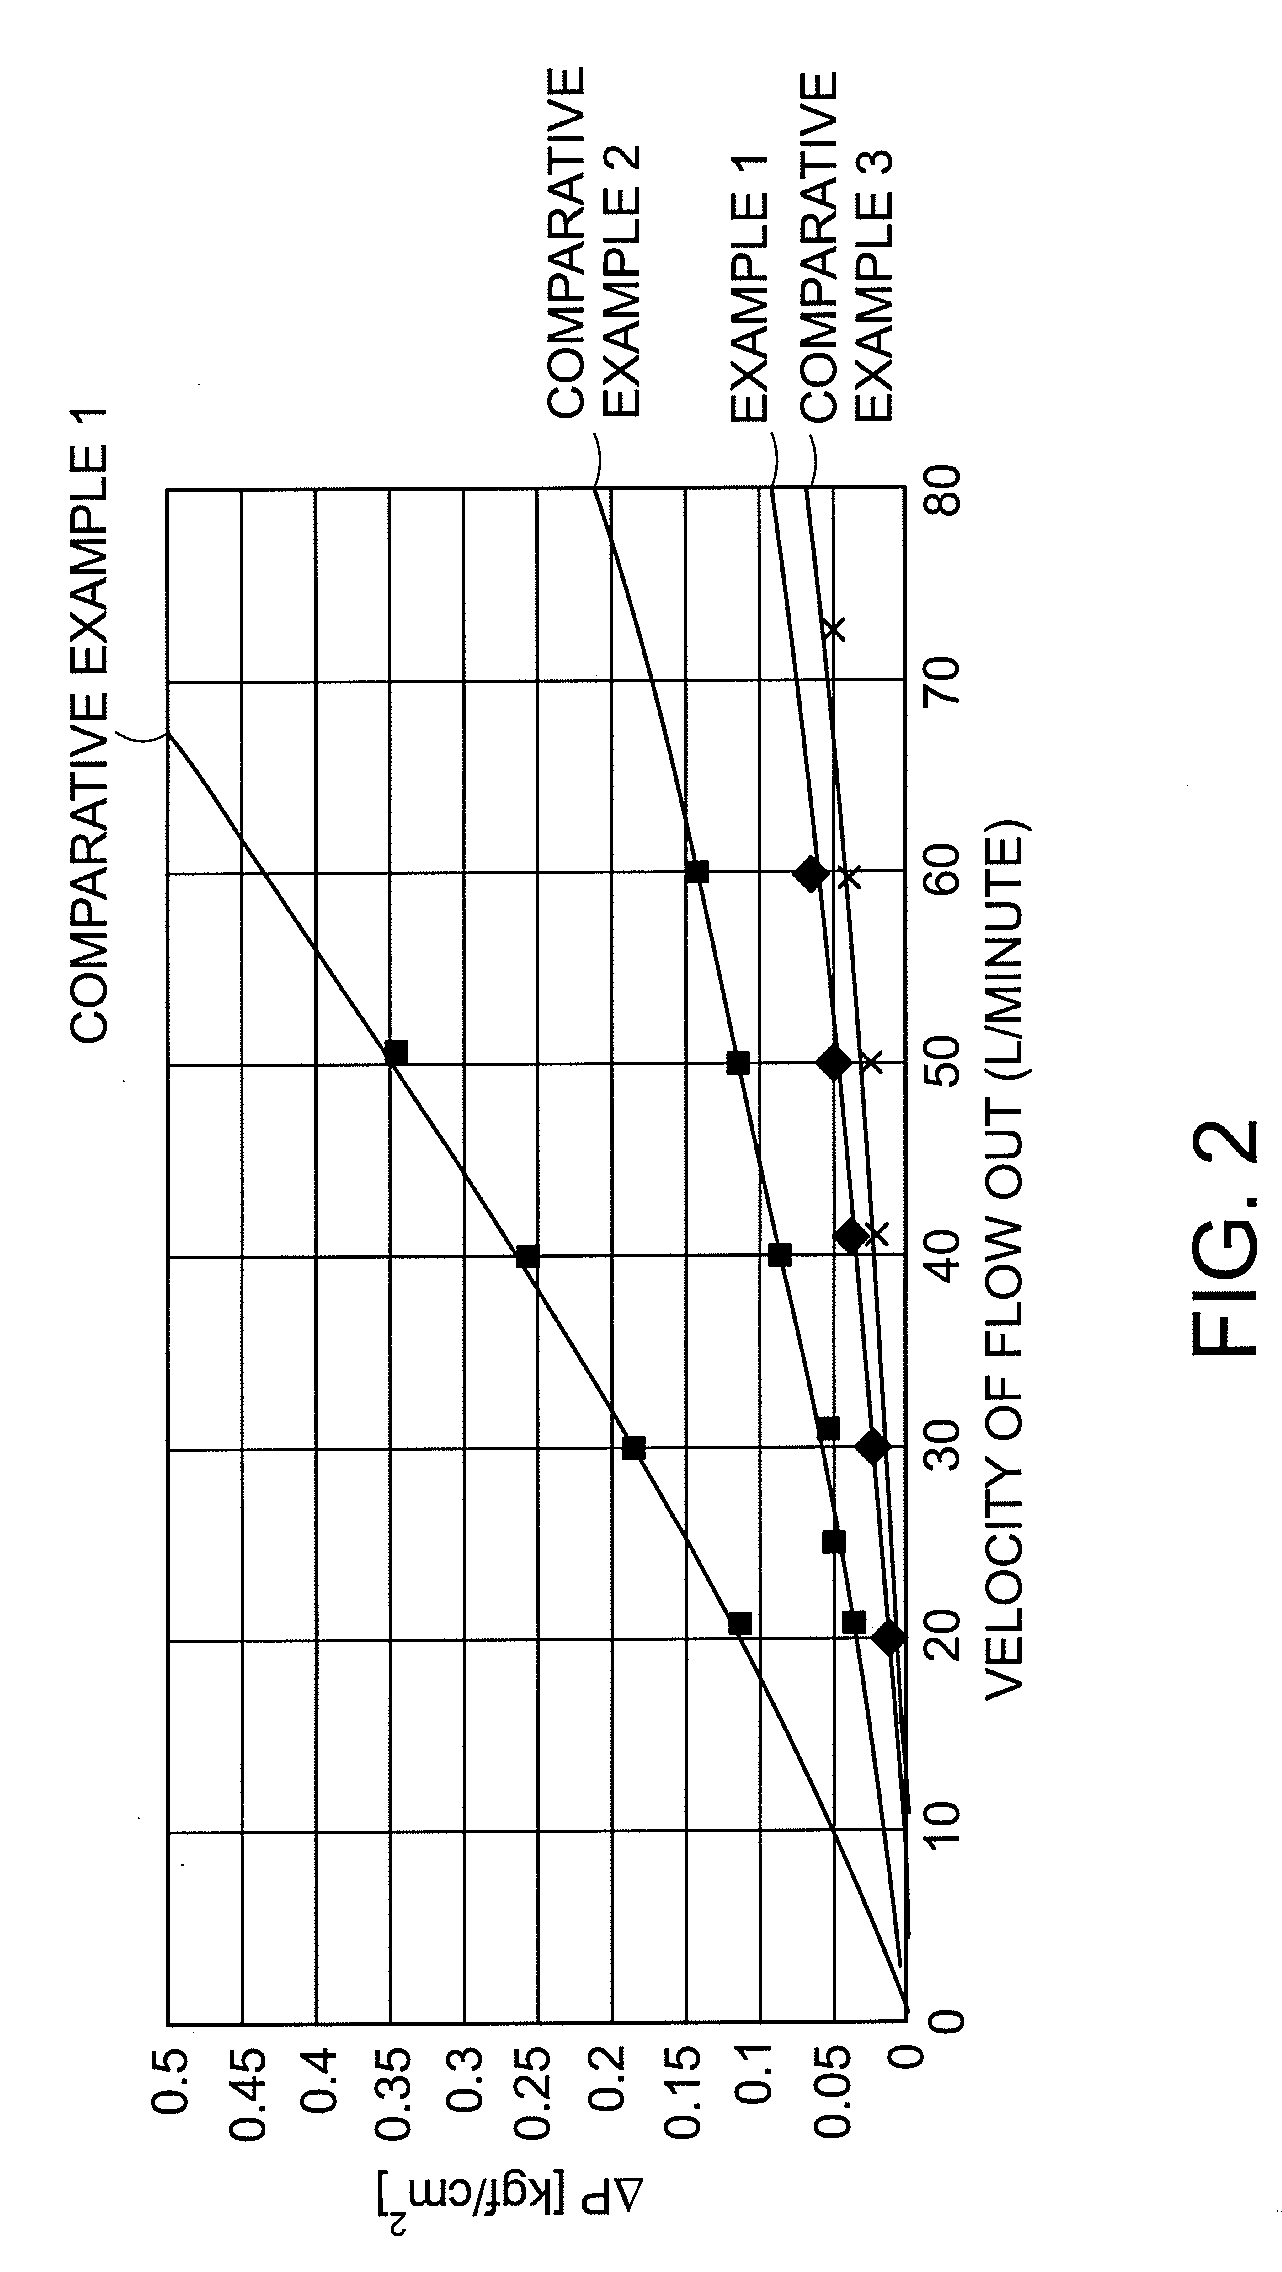 Pleated type cartridge filter device